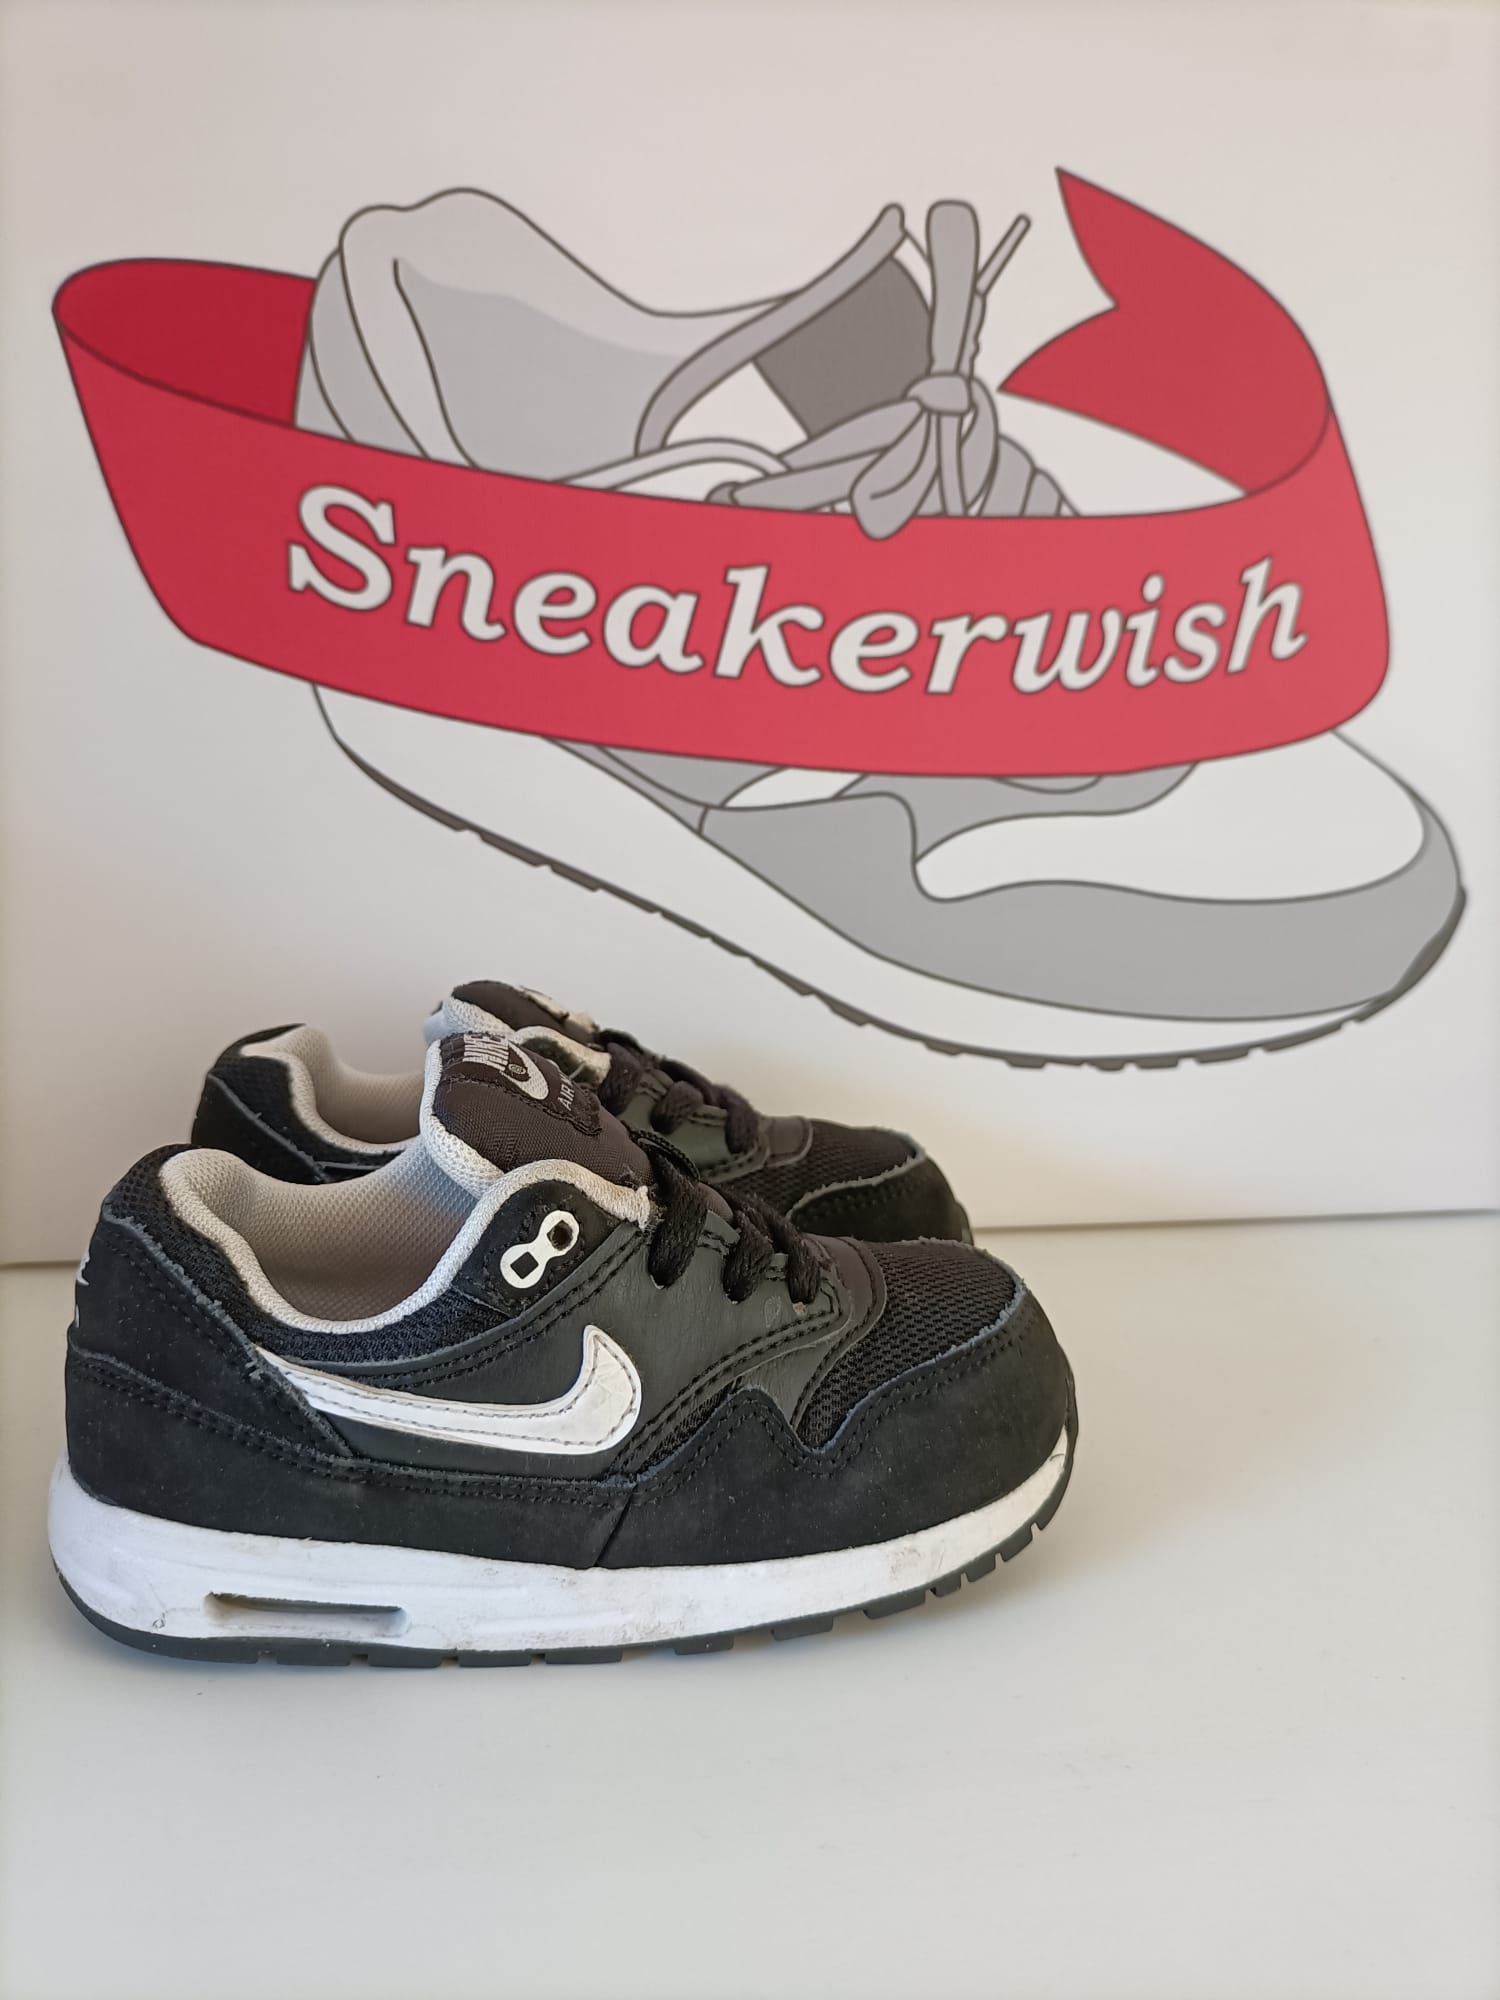 lont Corporation constante Nike Air Max 1 TD Green Black – Sneakerwish